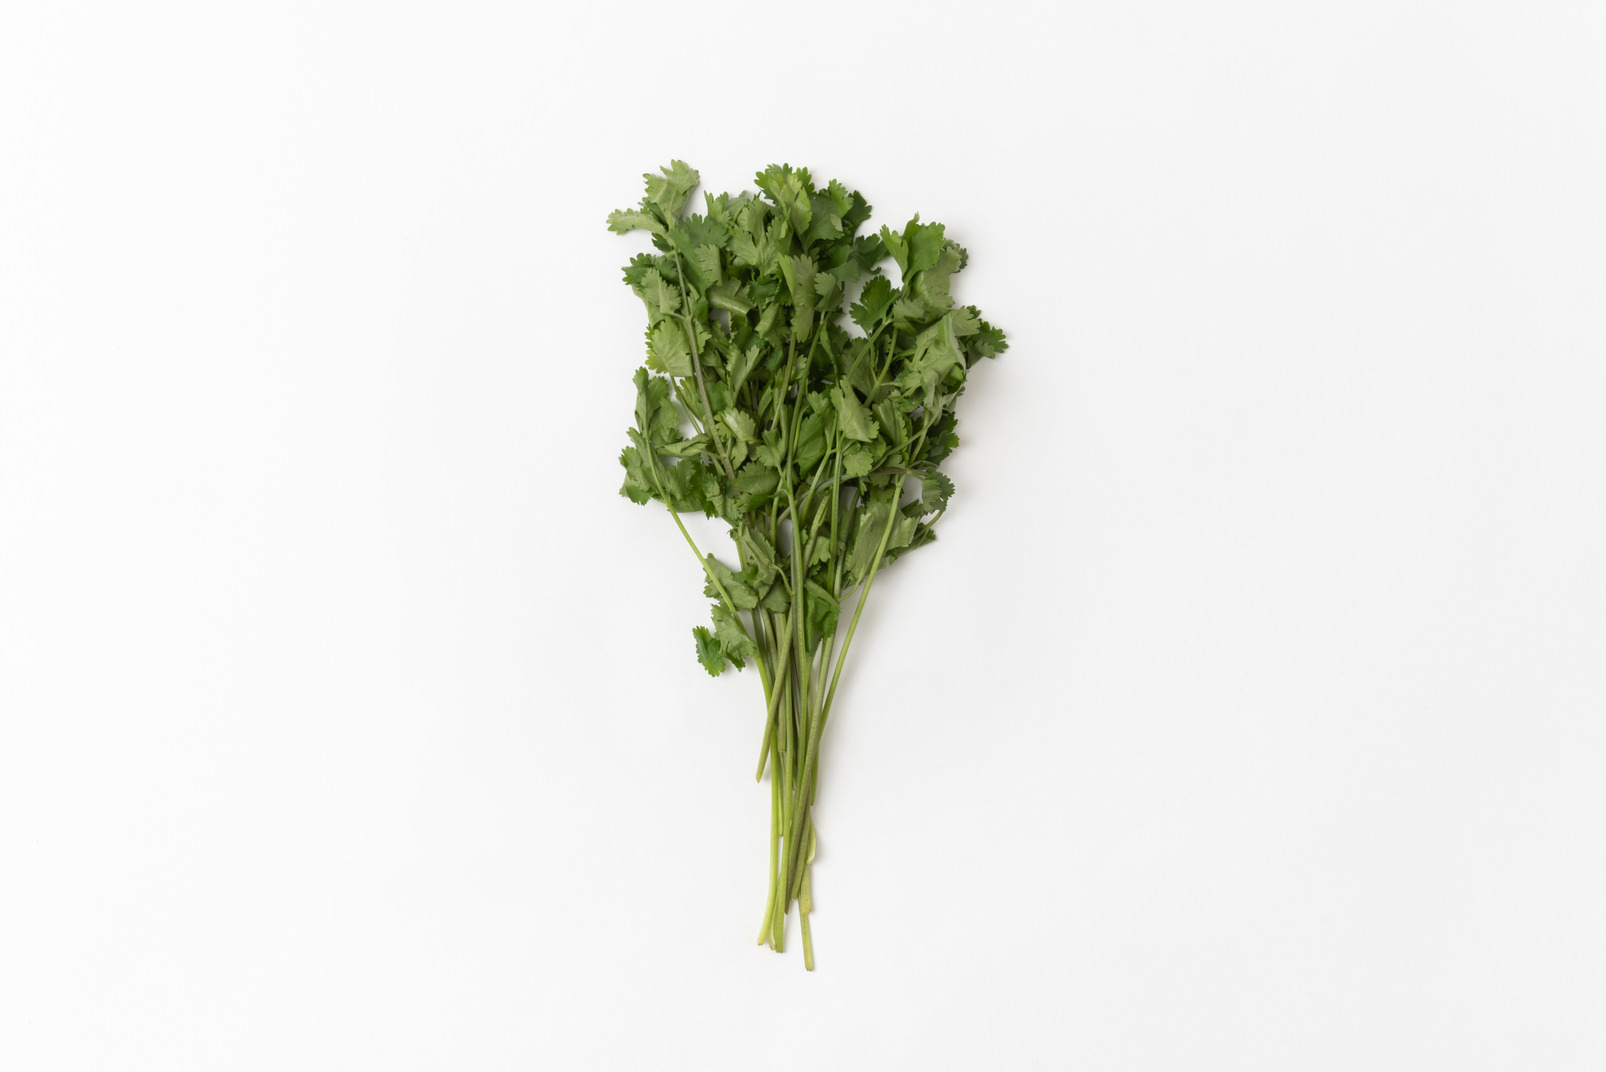 Parsley bunch on white background